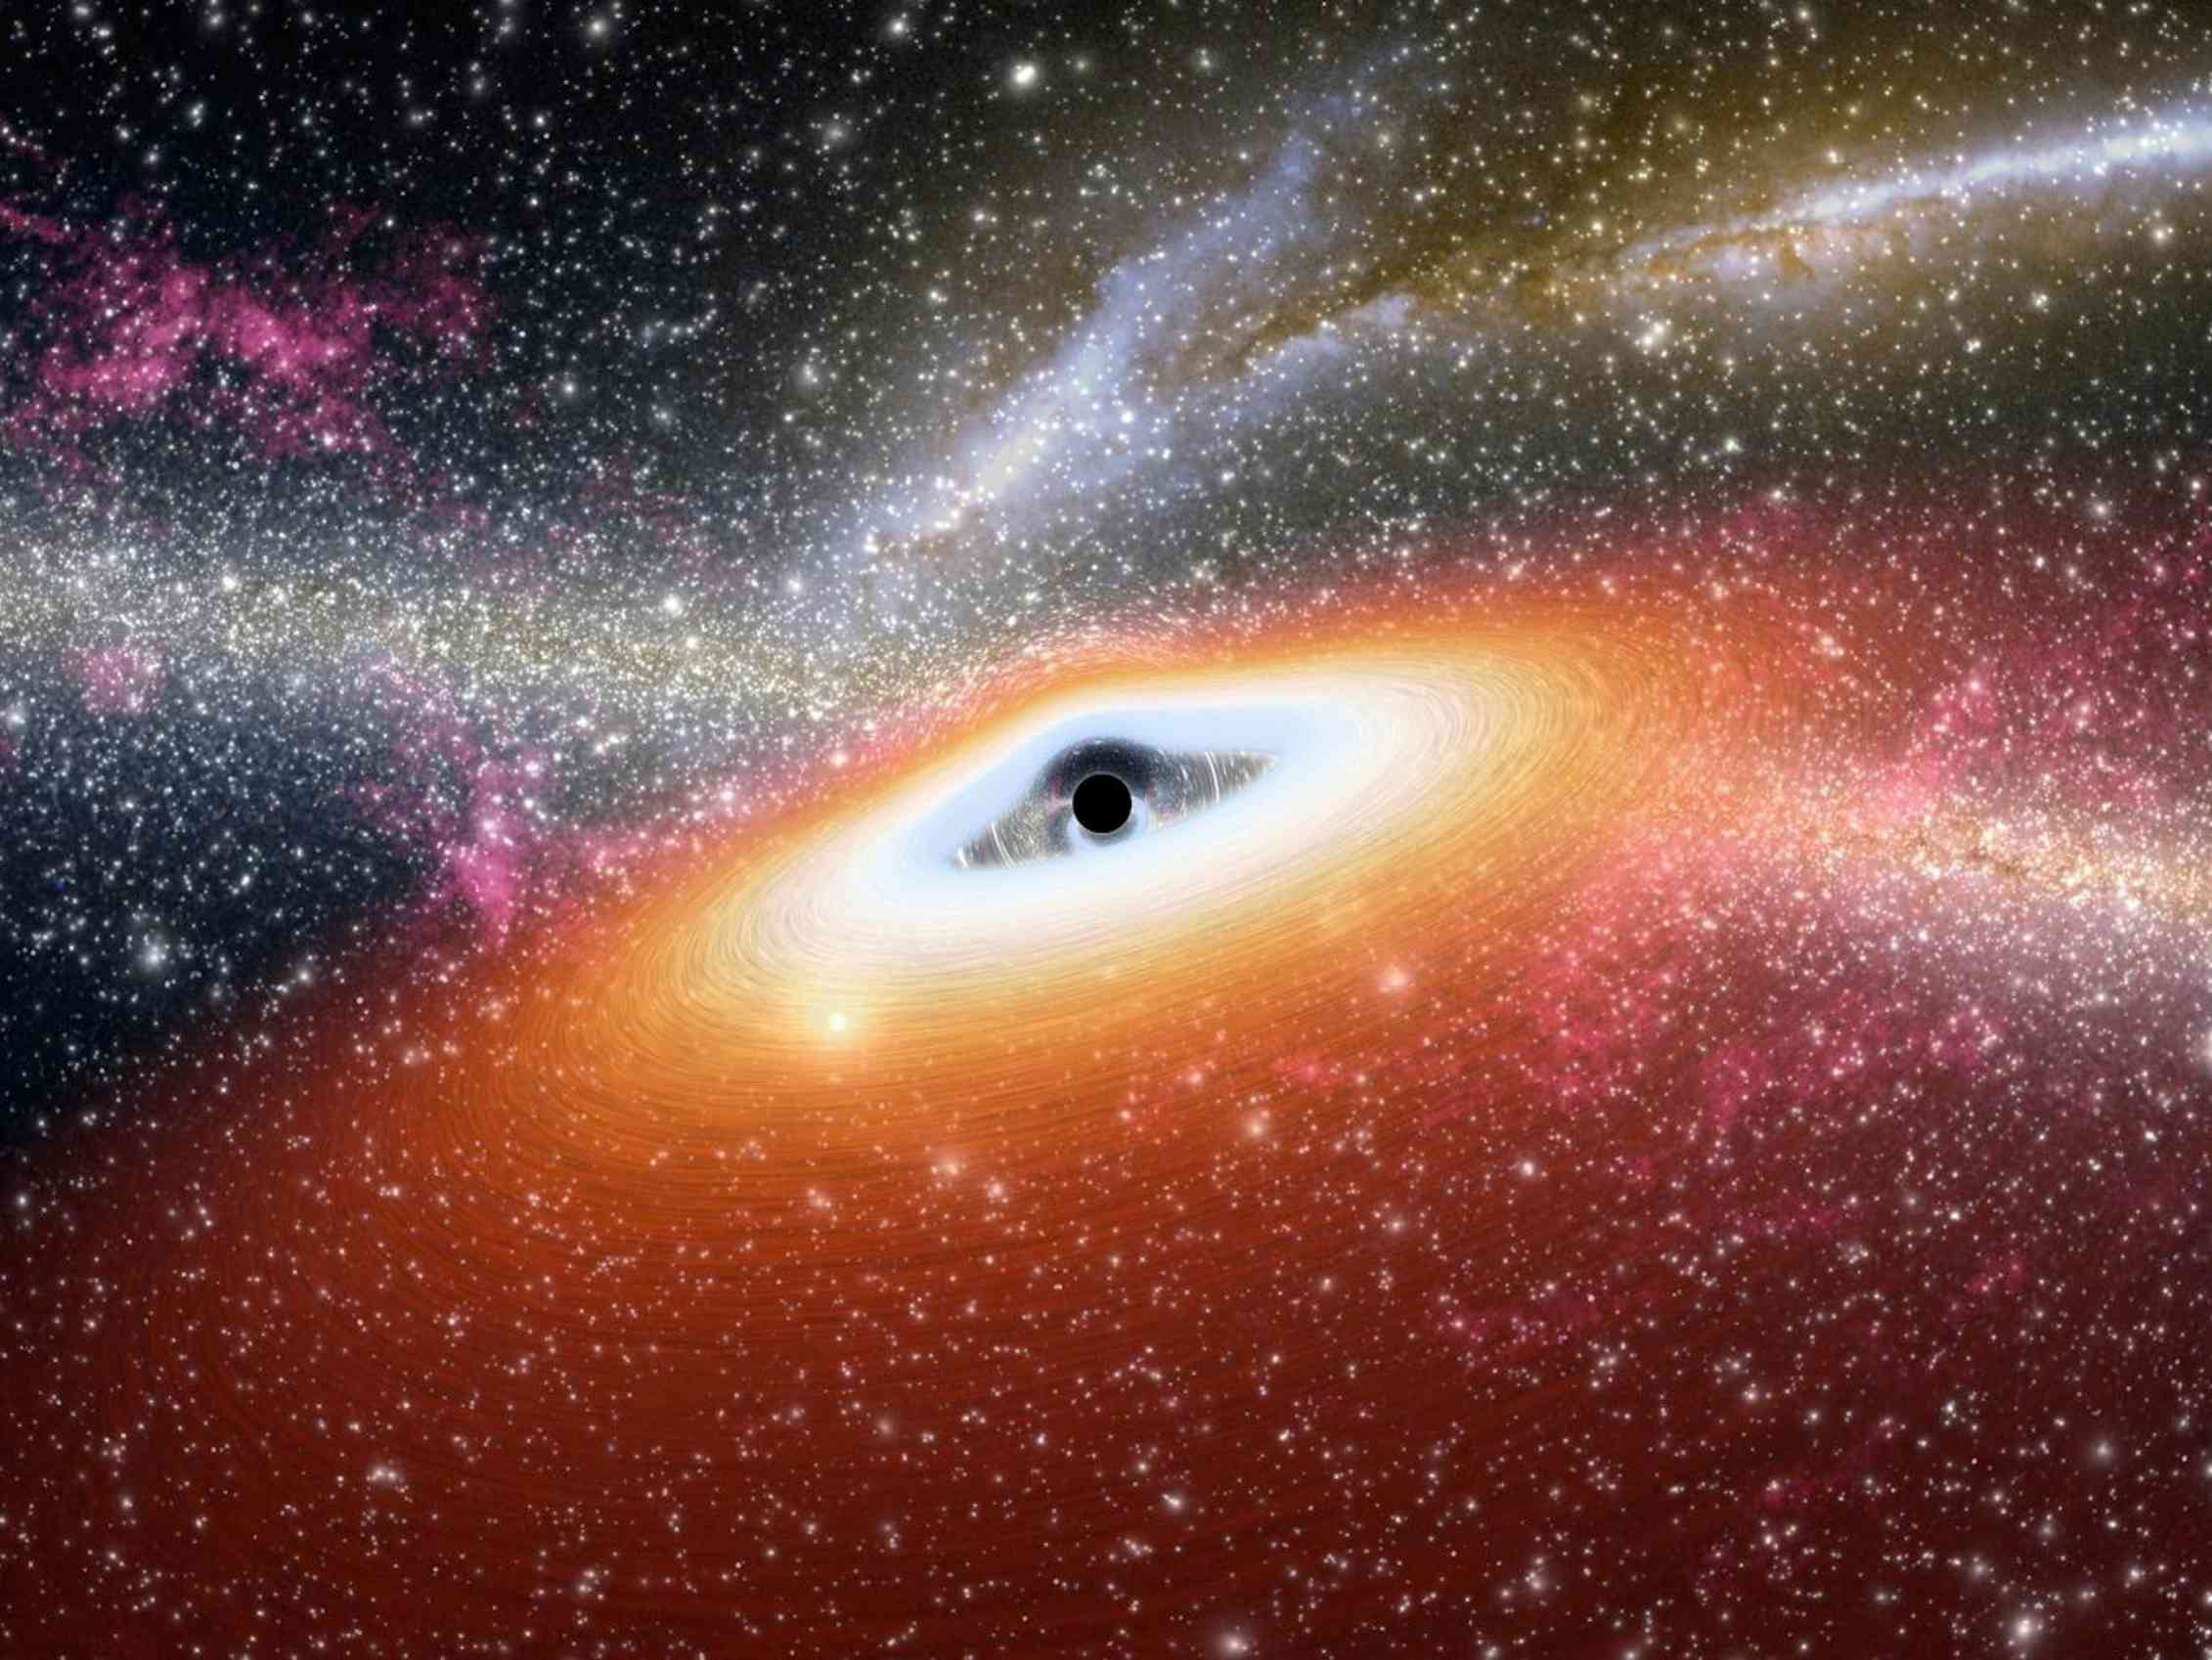 Artist's impression of black hole surrounded by stars